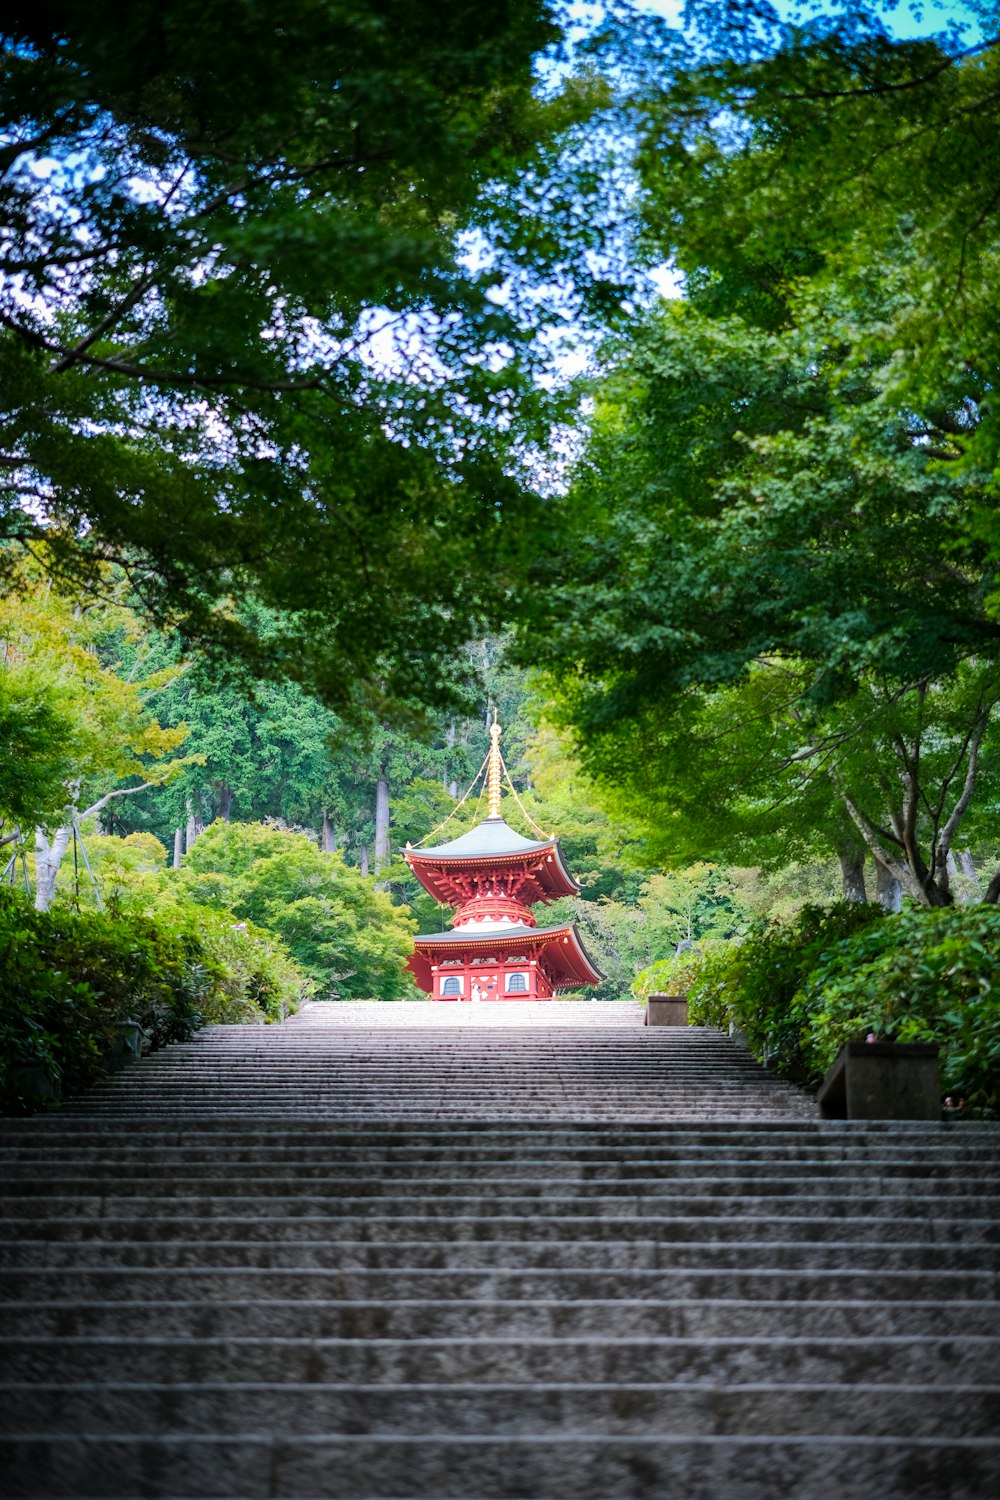 a red pagoda with a pointed roof surrounded by trees